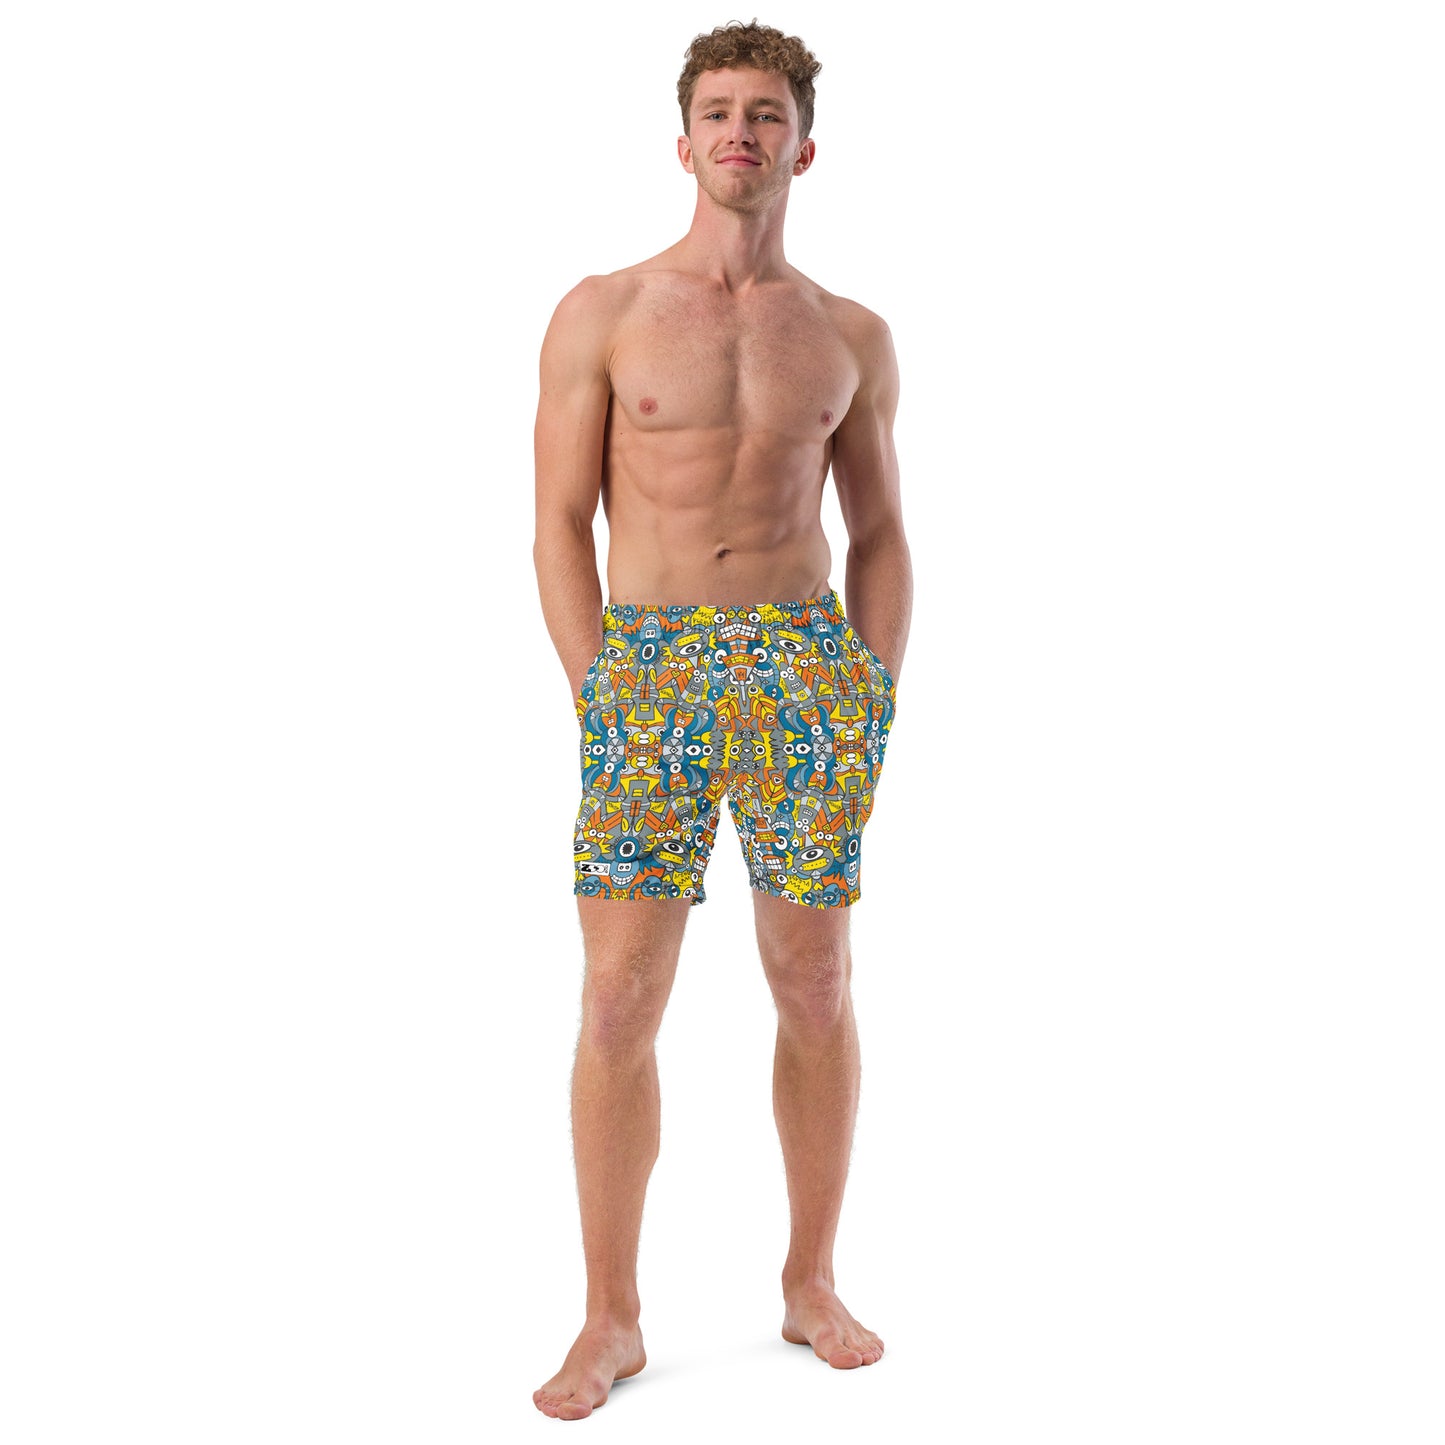 Young man wearing Men's swim trunks All-over printed with Retro robots doodle art